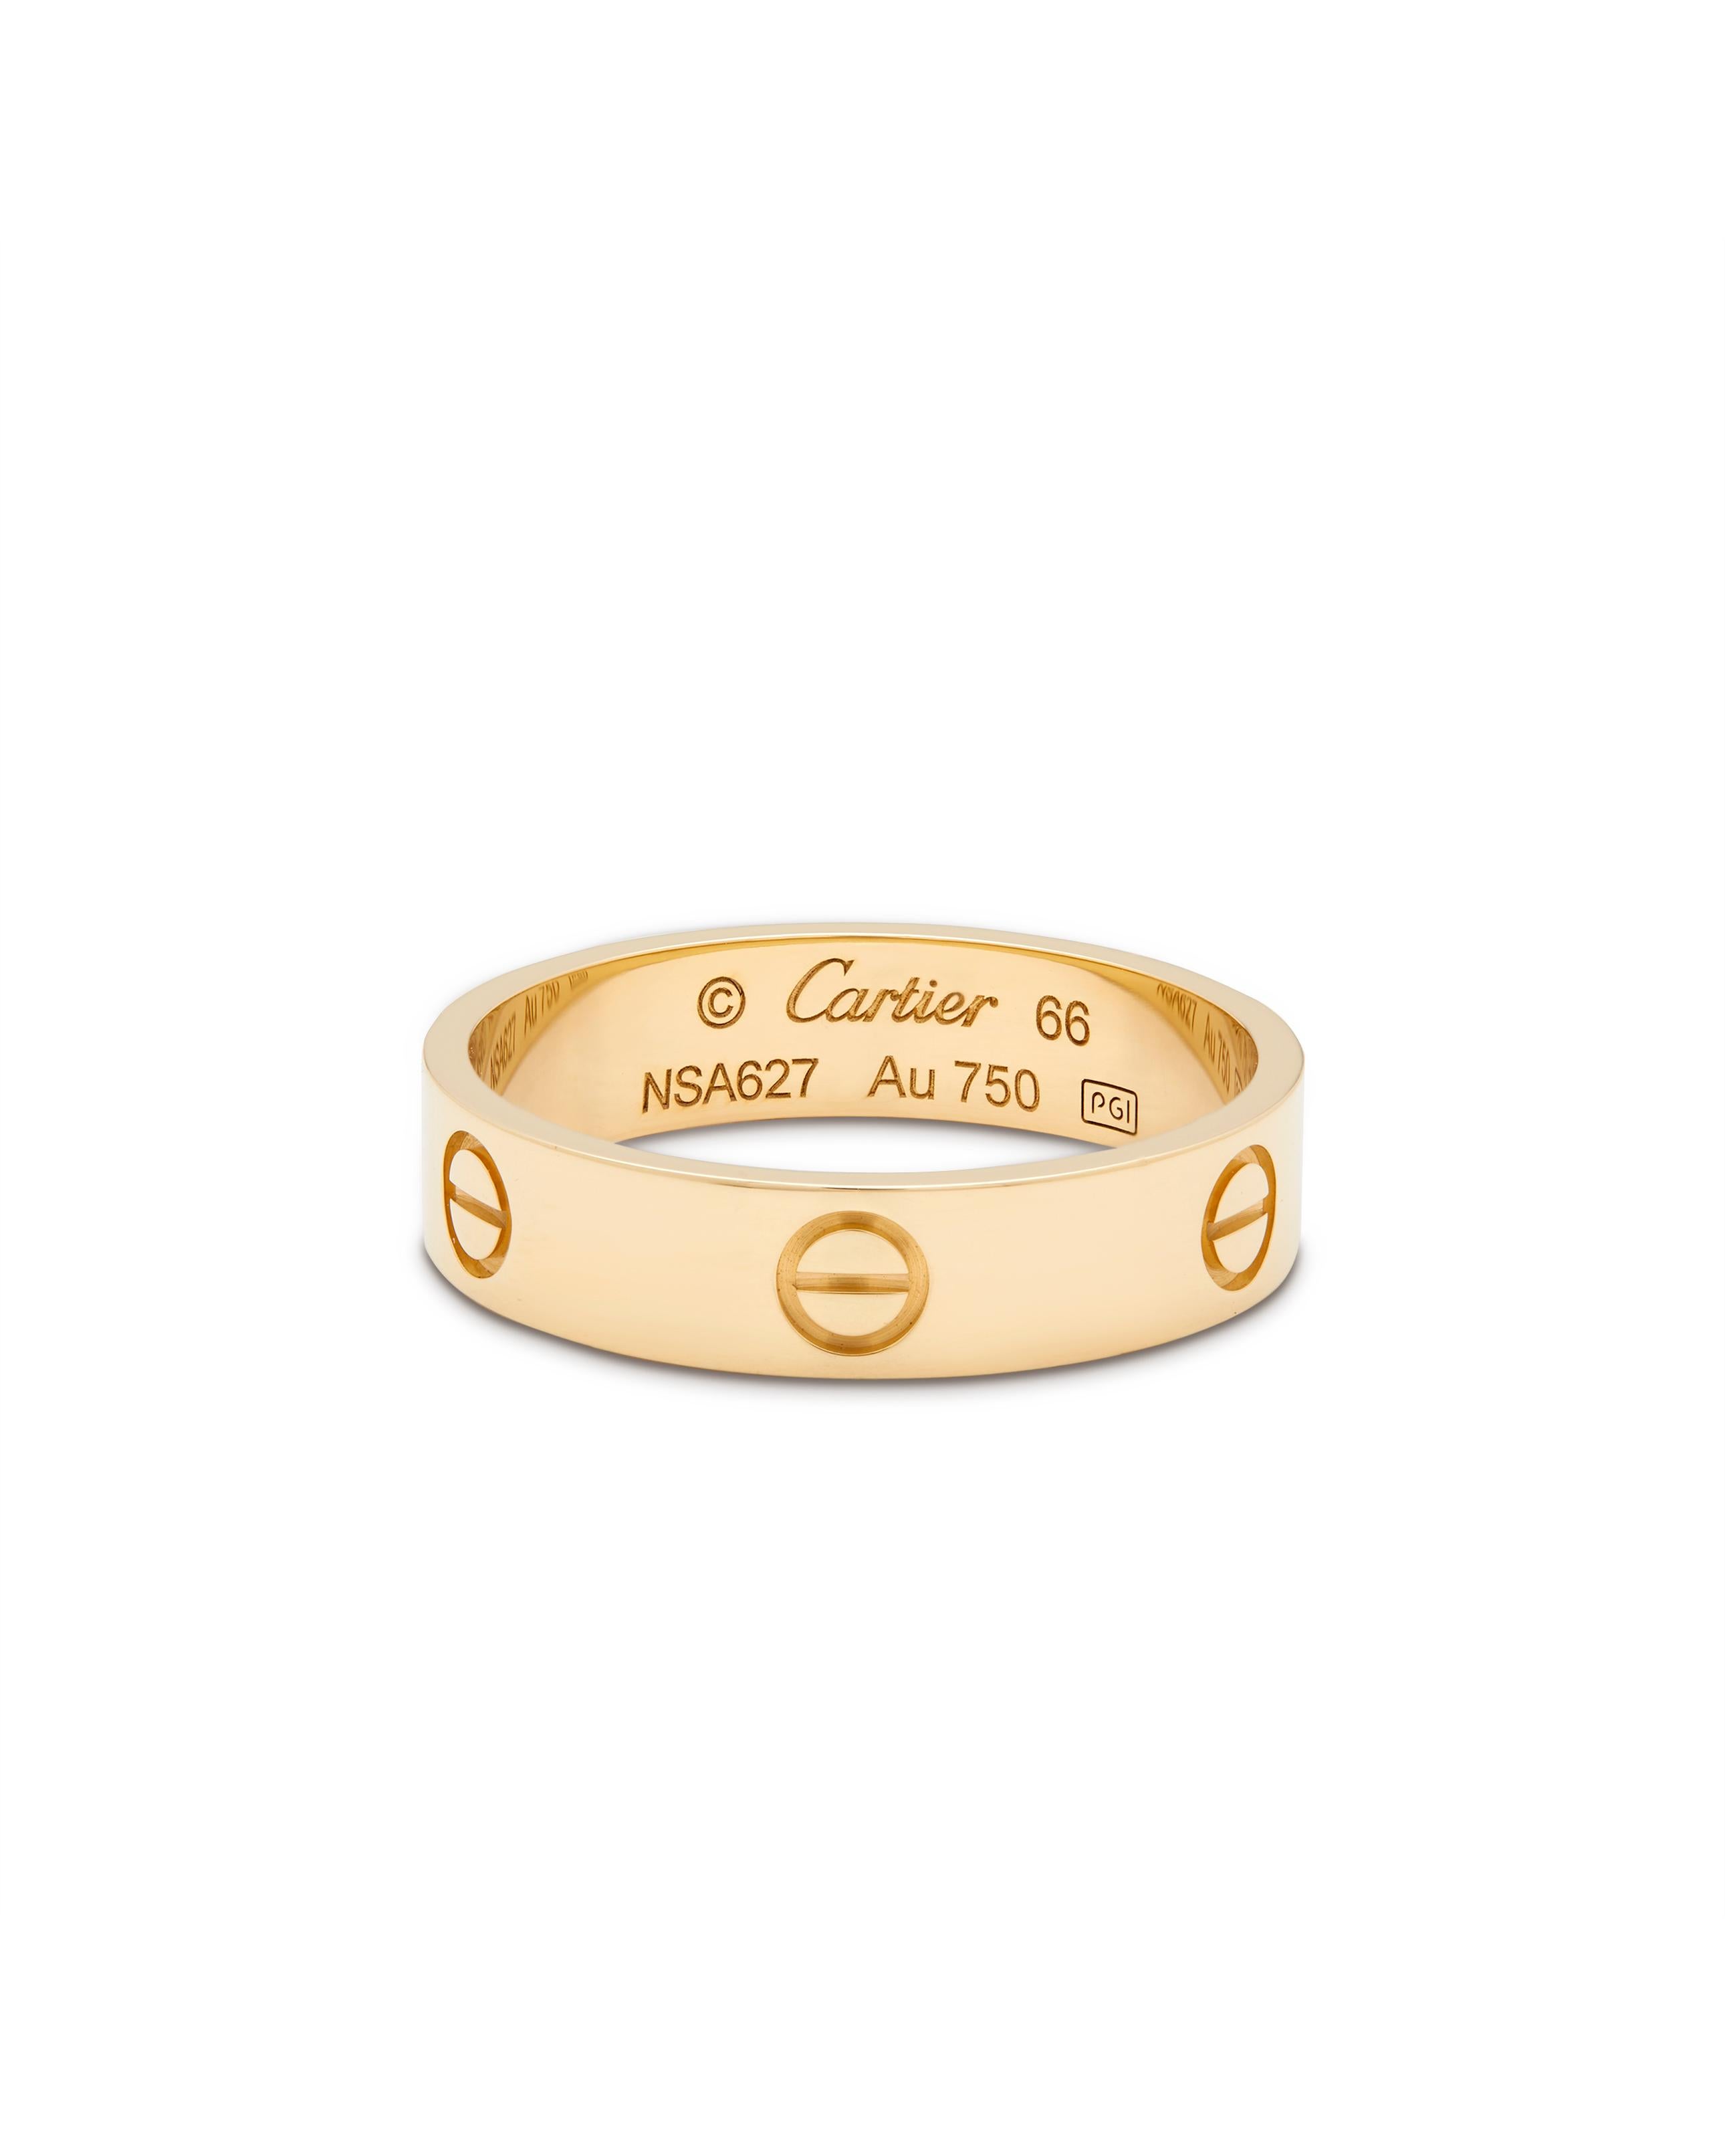 how many mm is the cartier love ring